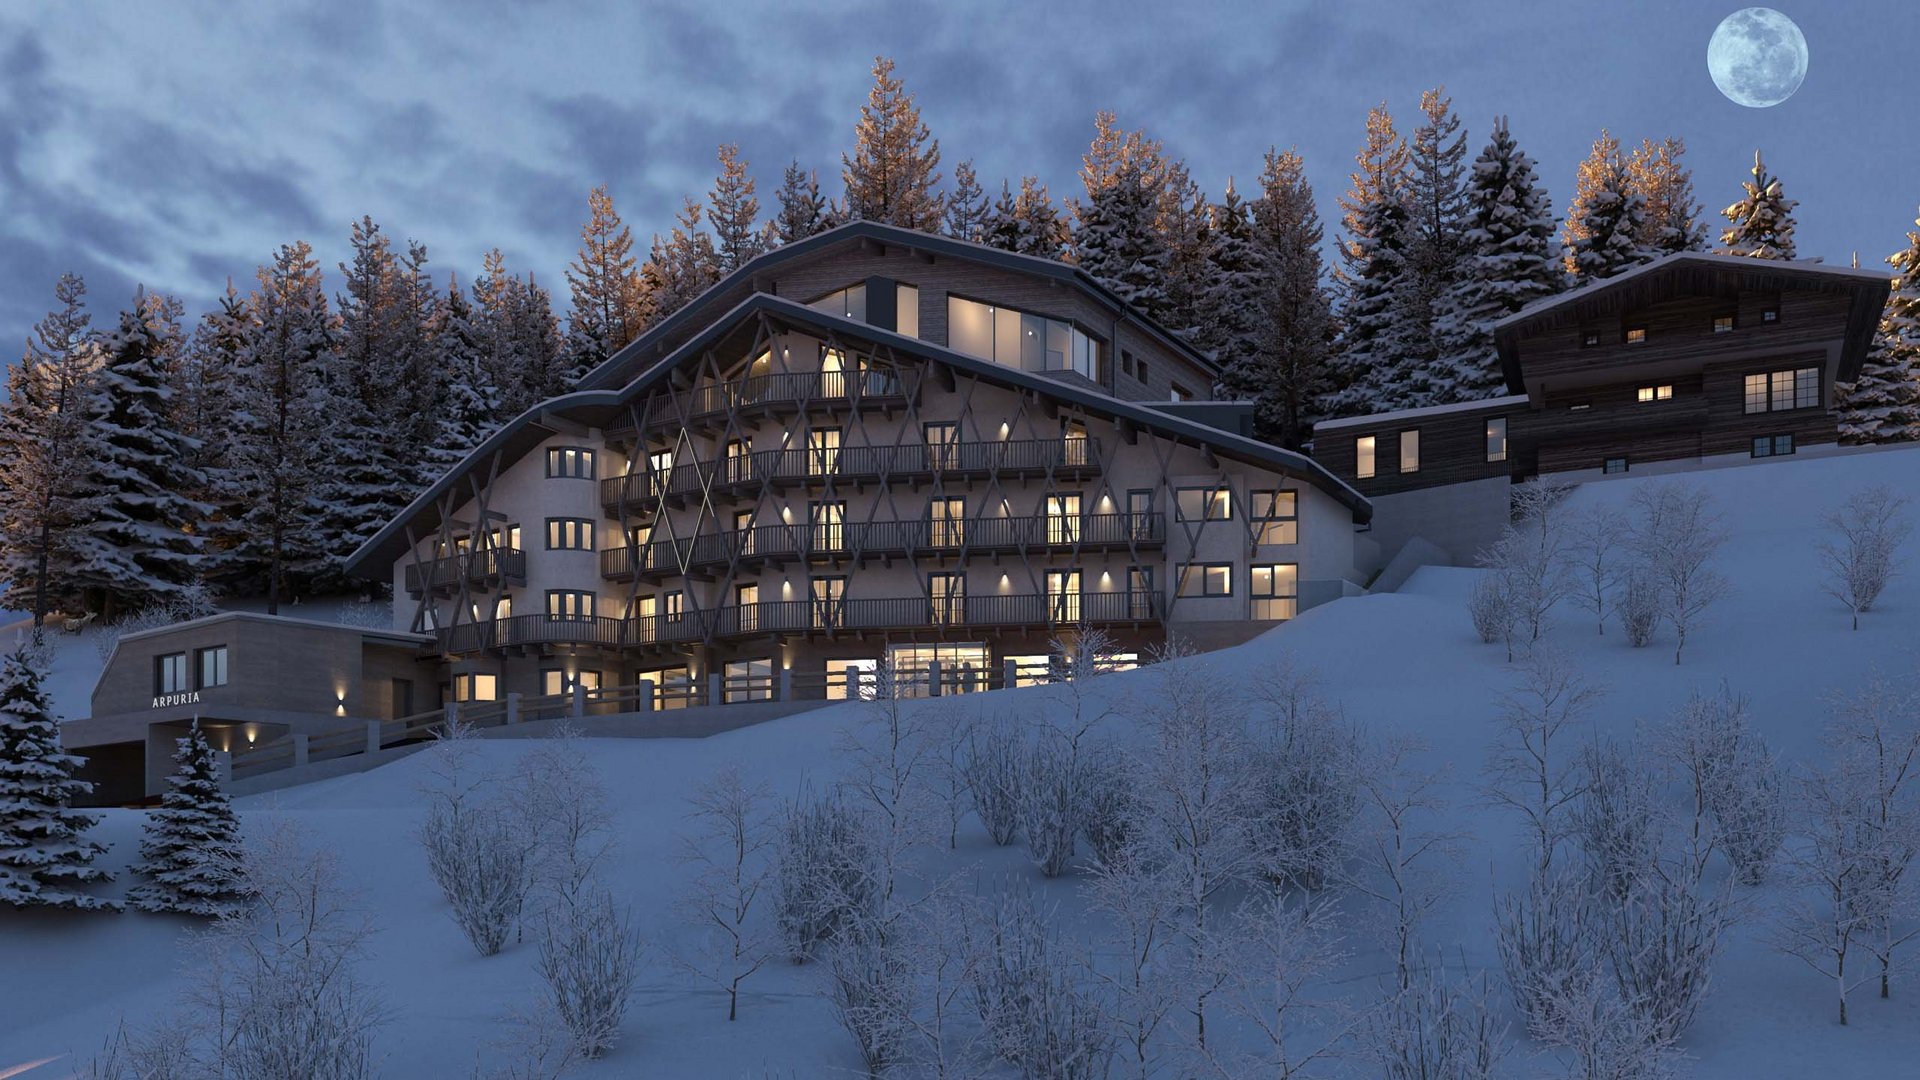 A hotel in St. Anton. Just any hotel? No.